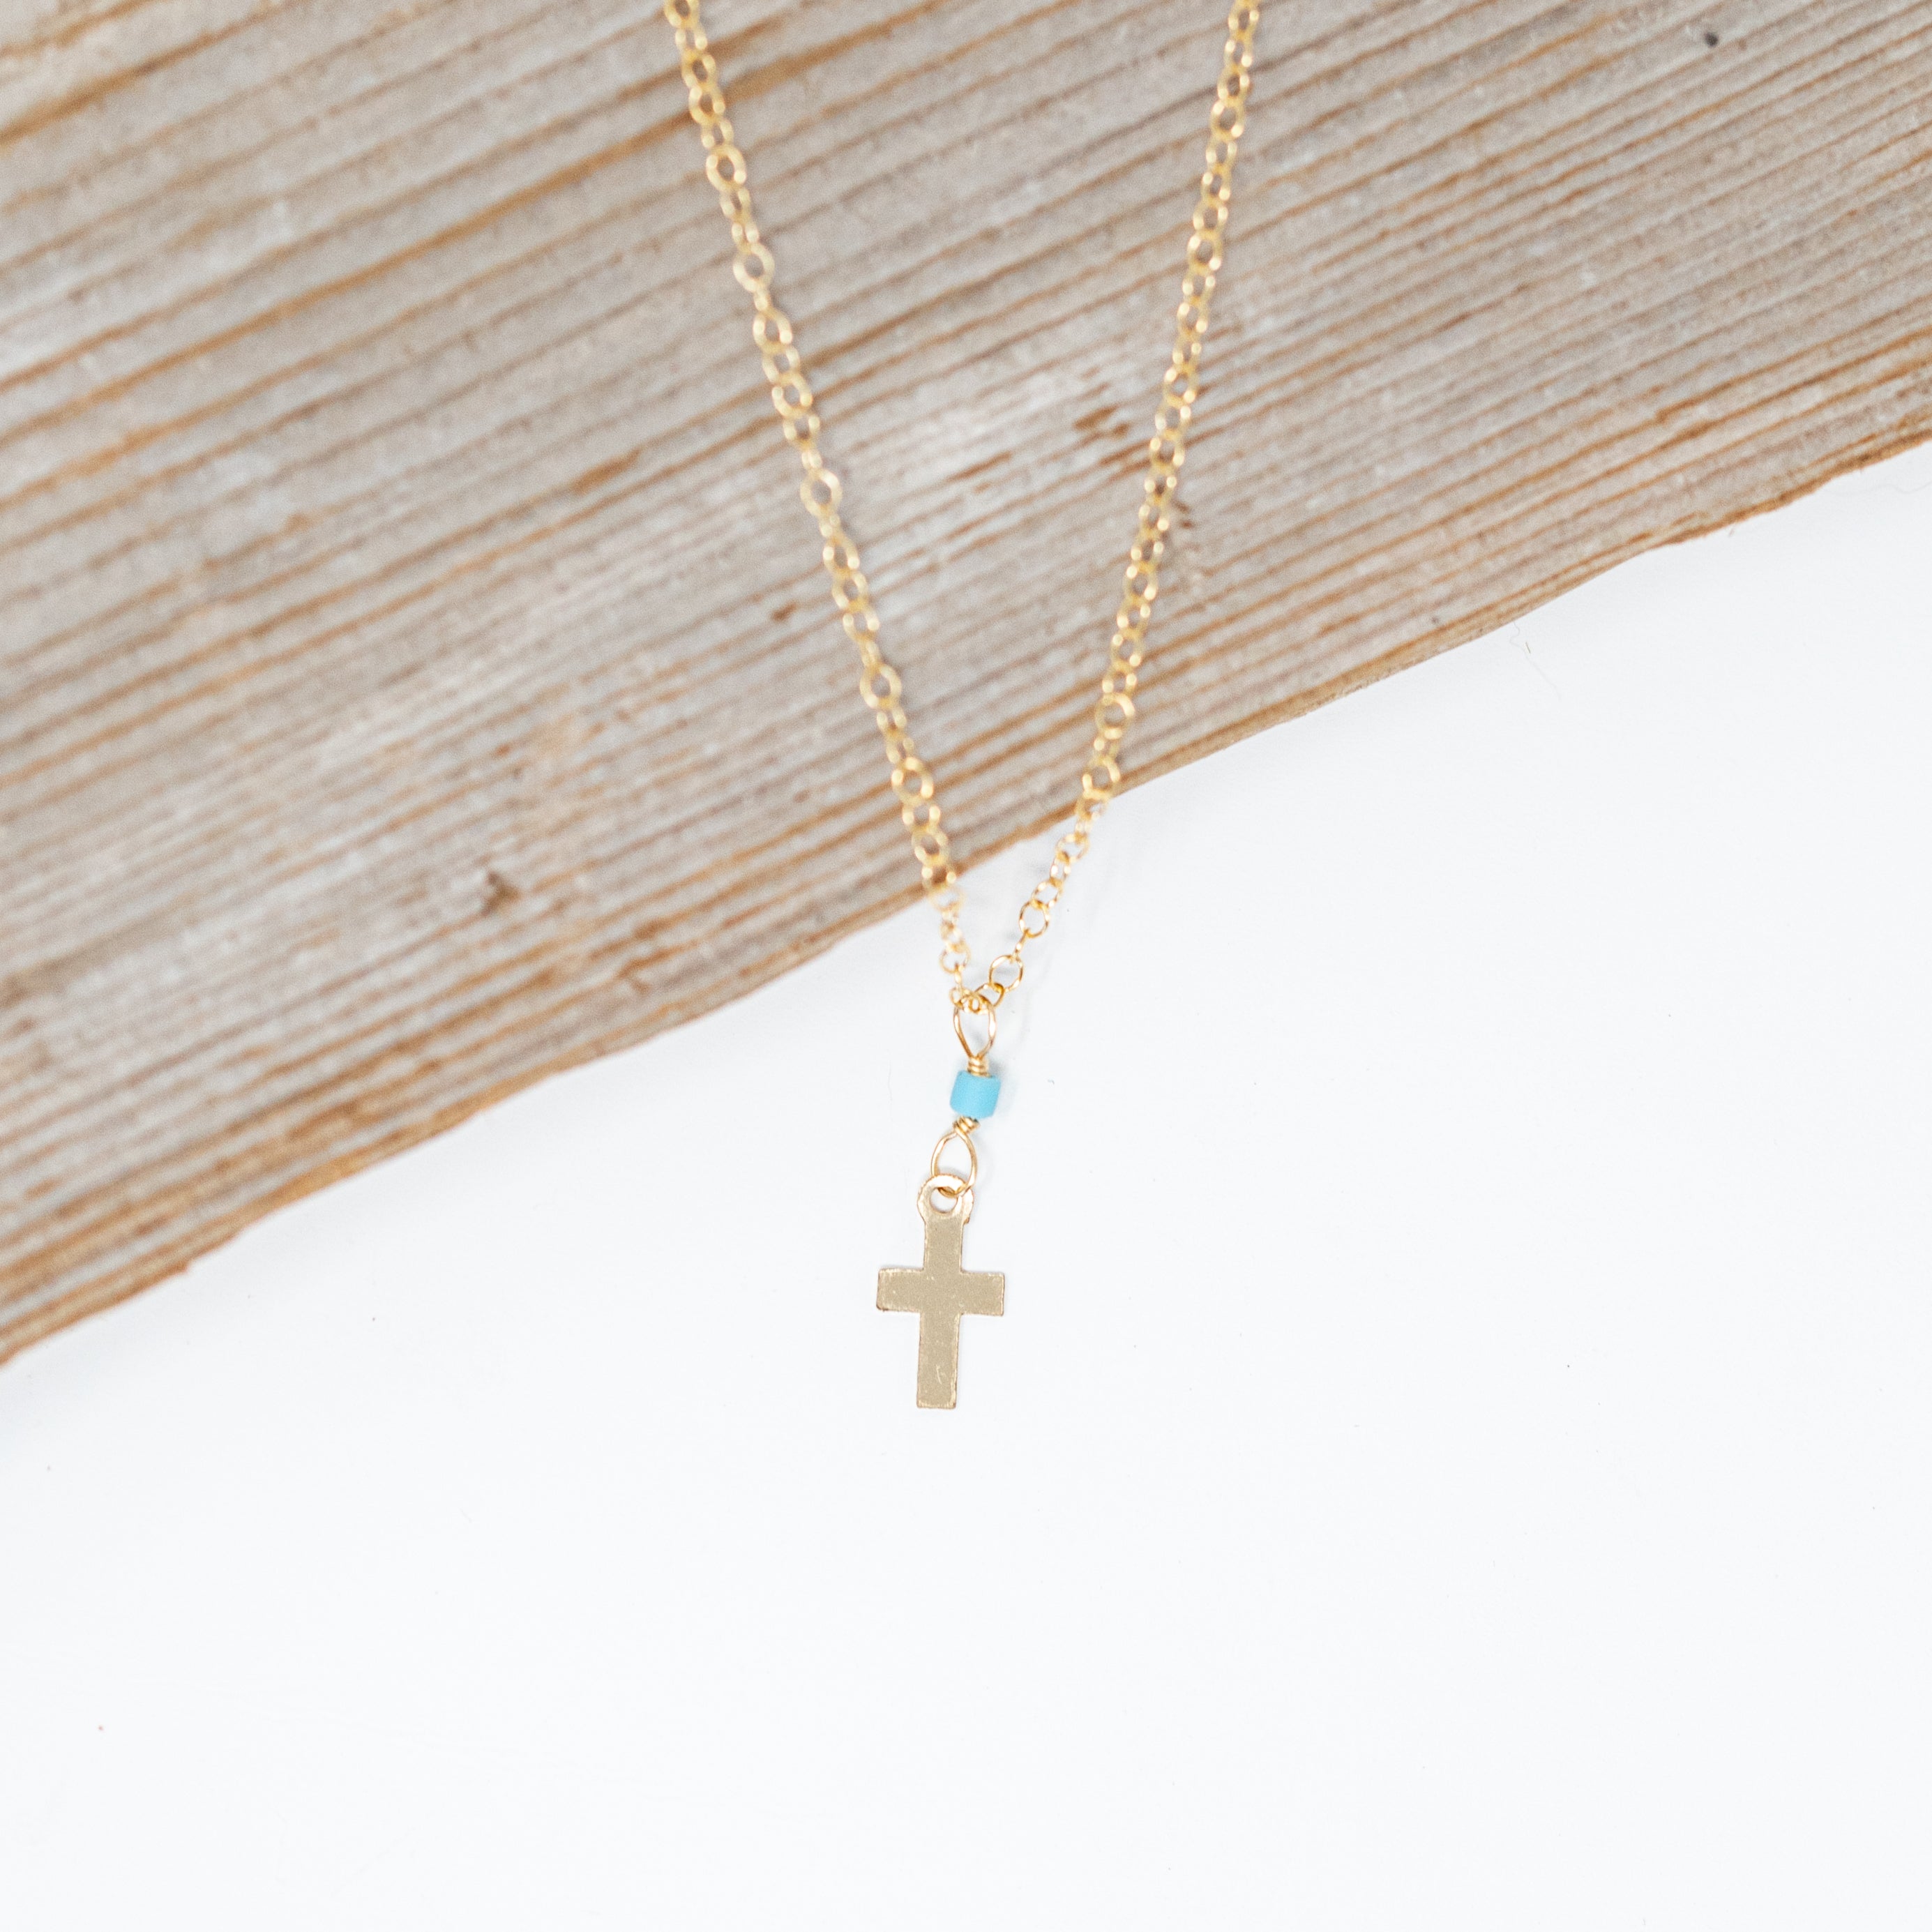 Tiny gold filled cross necklace with a tiny turquoise bead attaching it to a gold chain. 